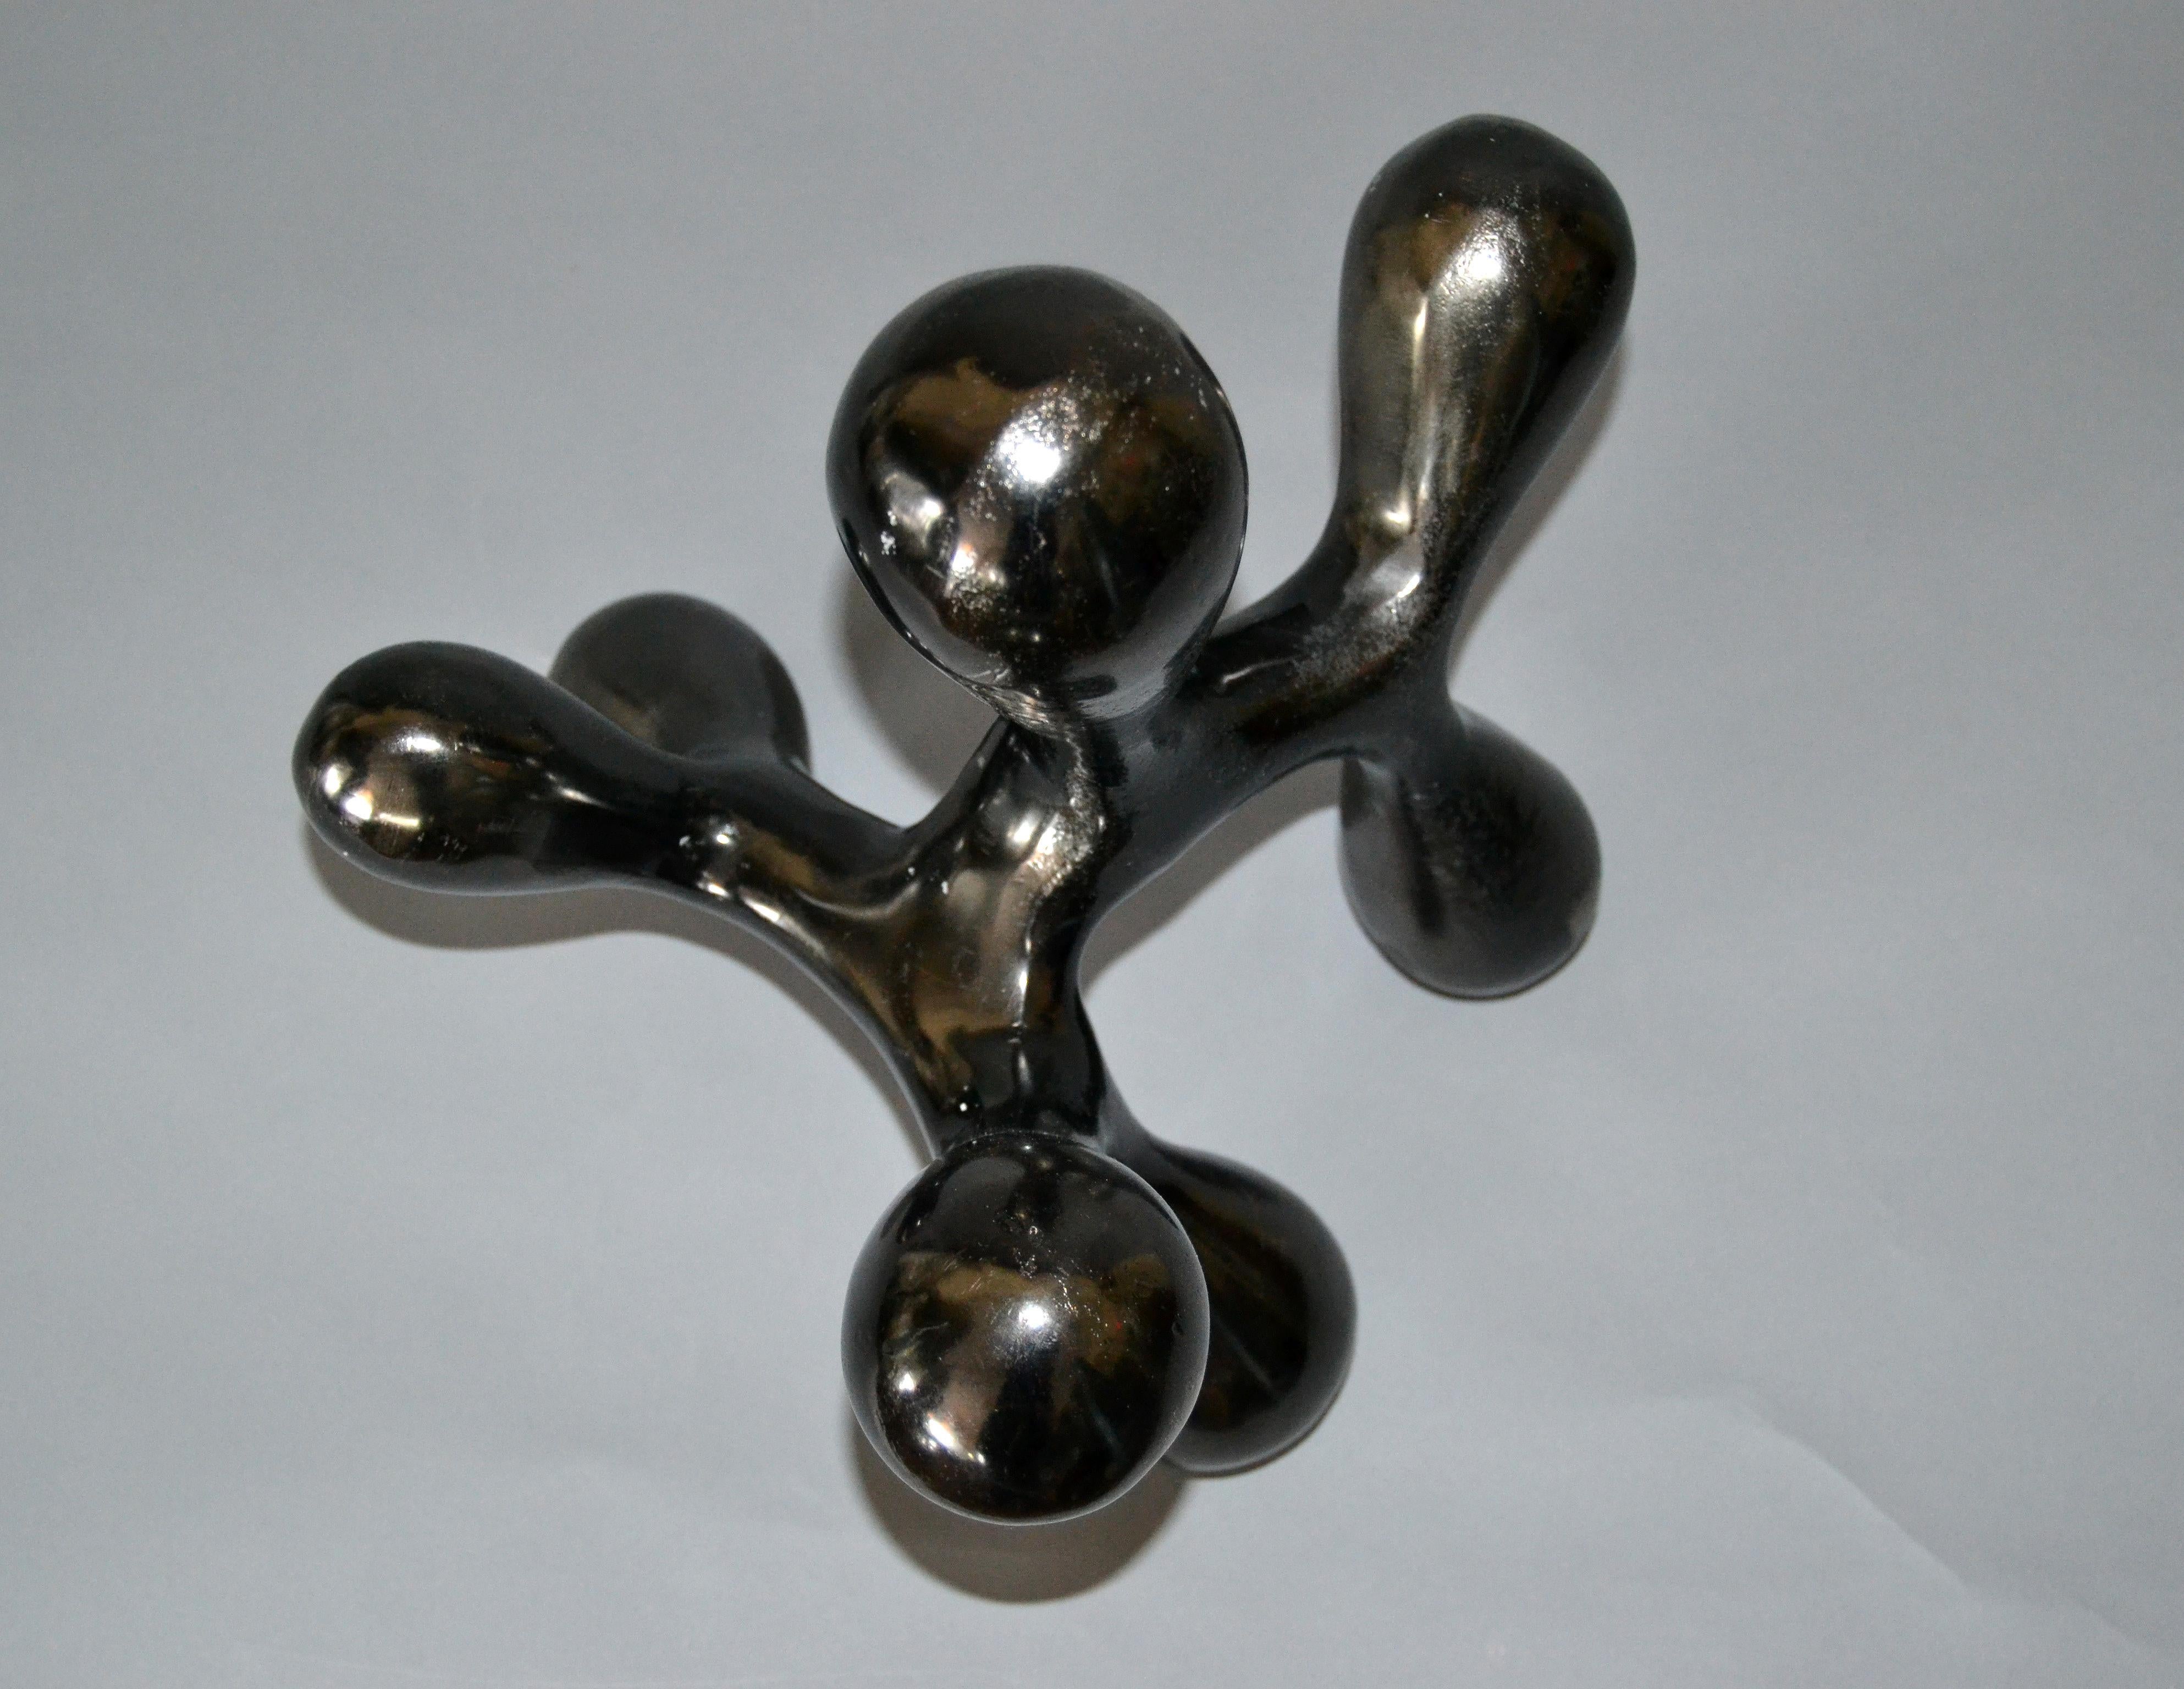 Biomorphic Shape in Abstract Art Bronze Table Sculpture 5